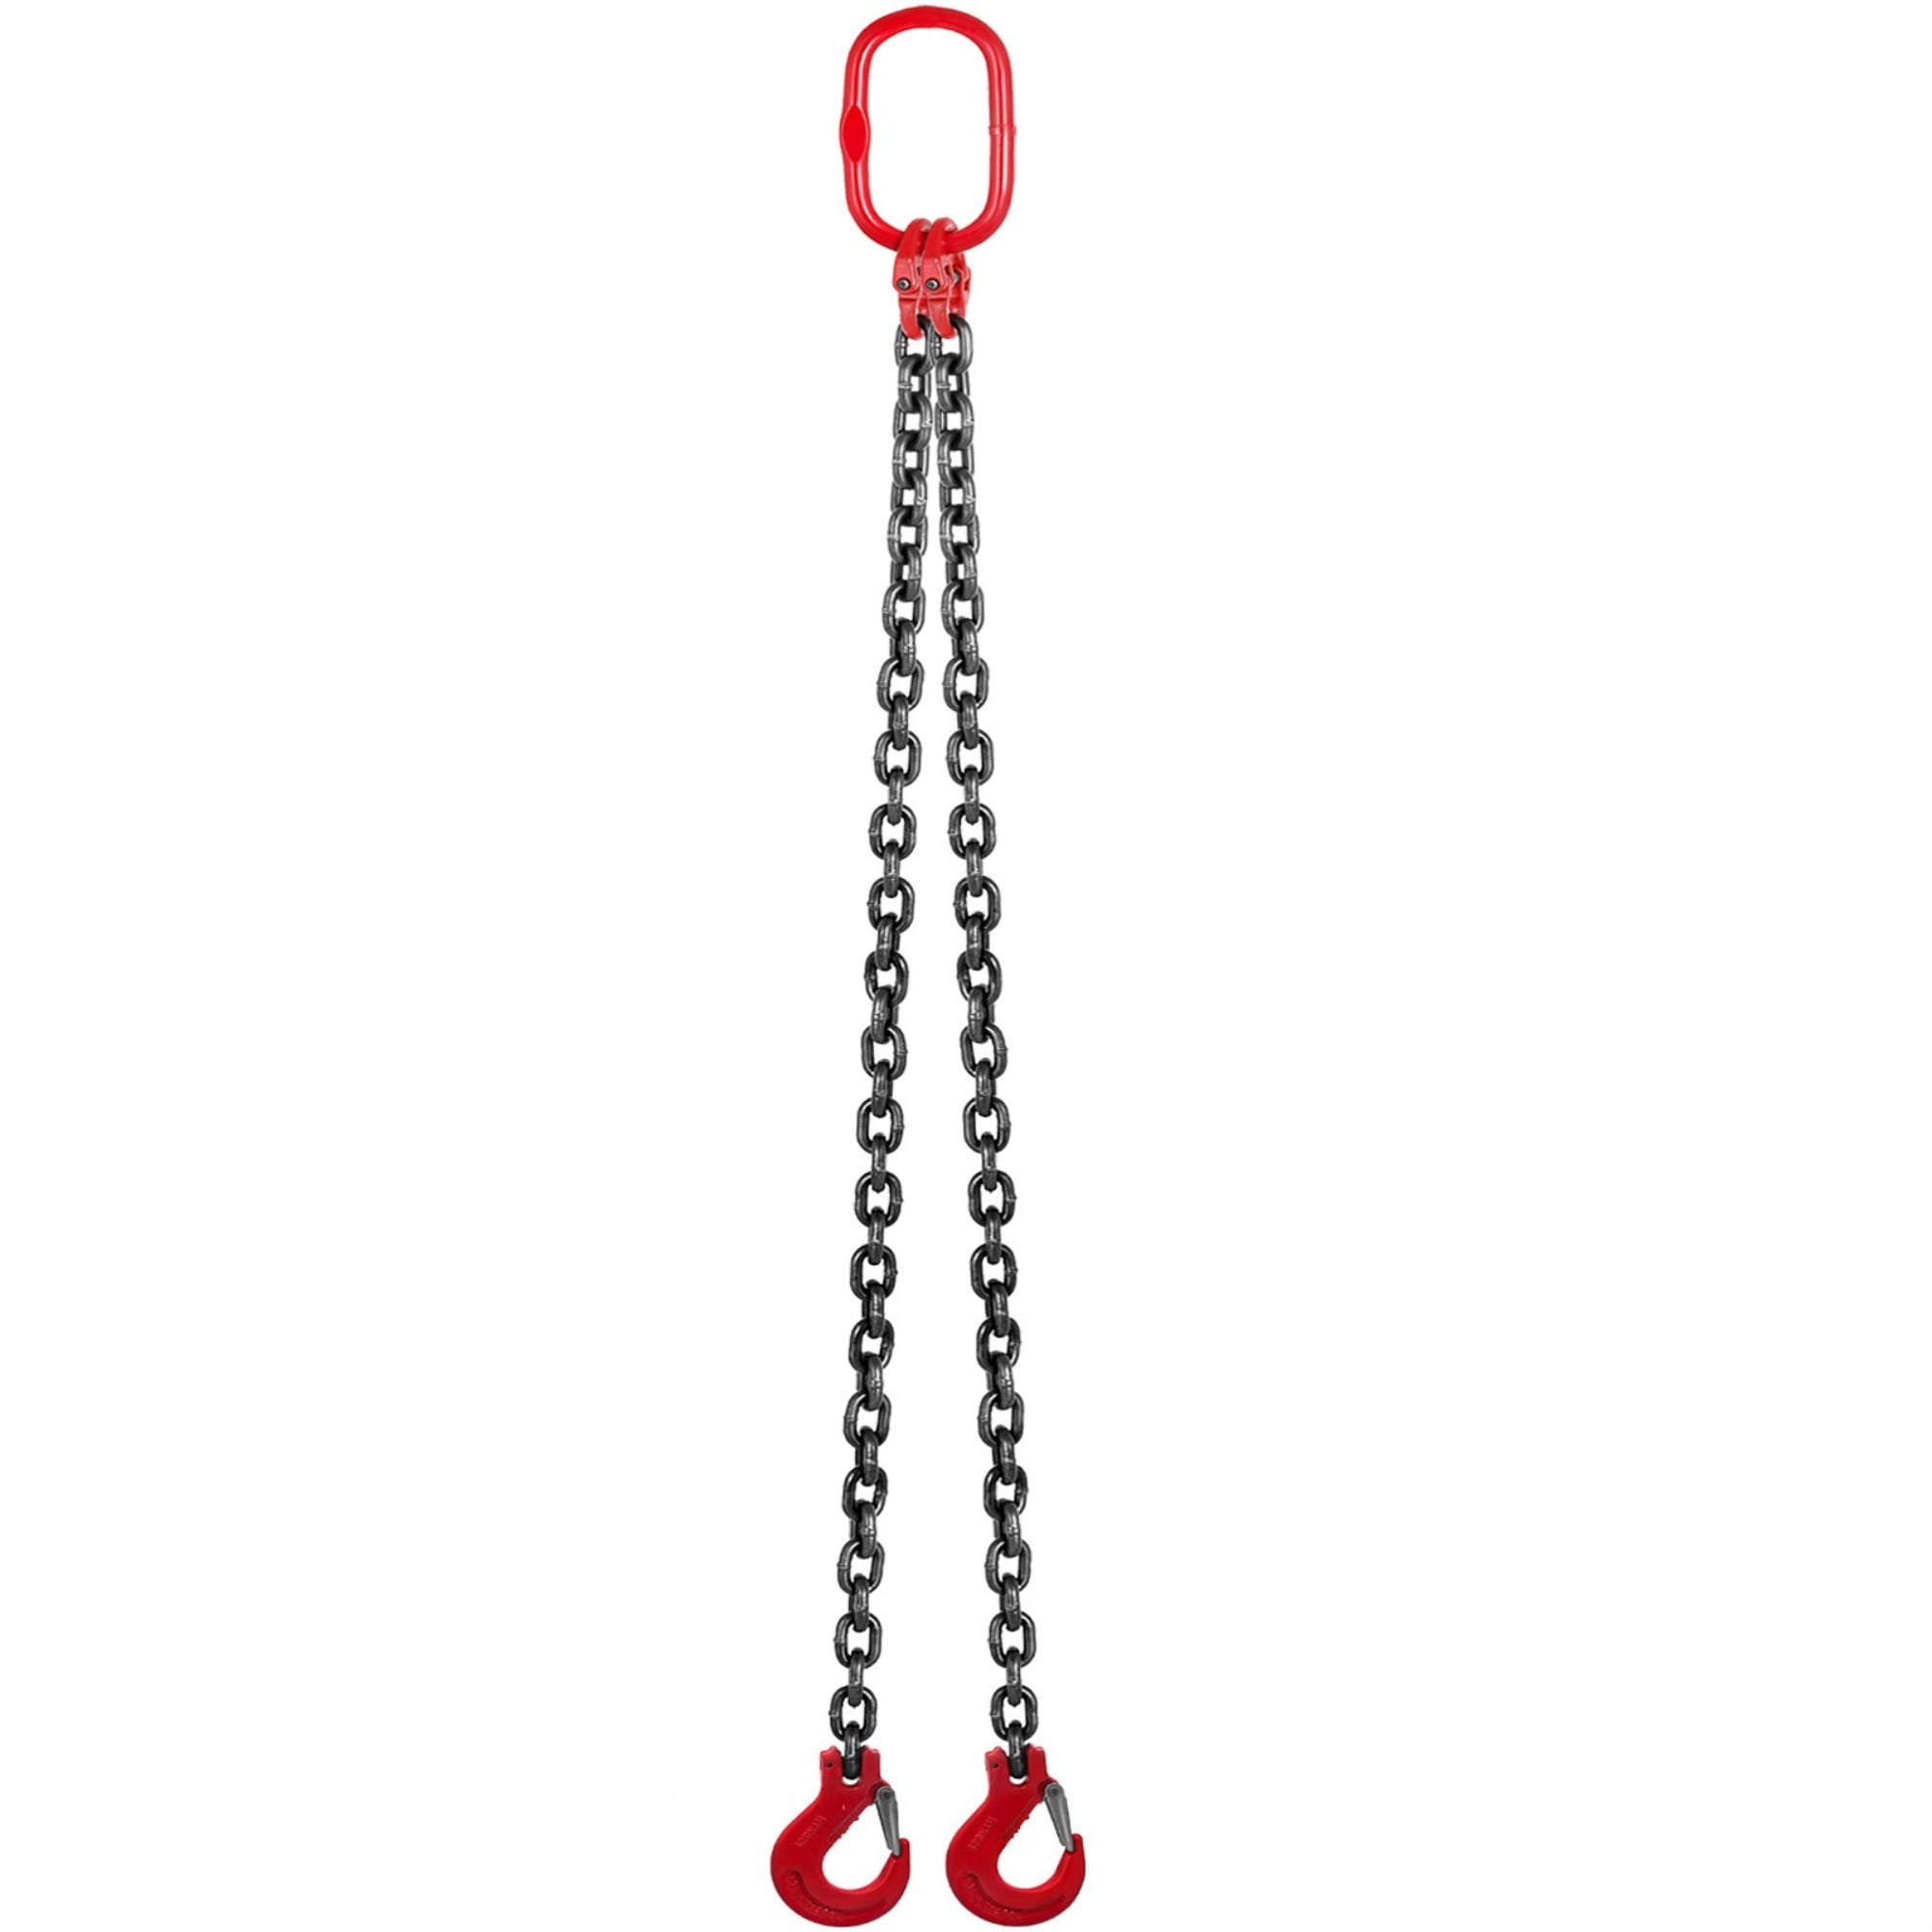 Grade 80 Chain Sling 5/16 x 6 Single Leg with Grab and Sling Hook 